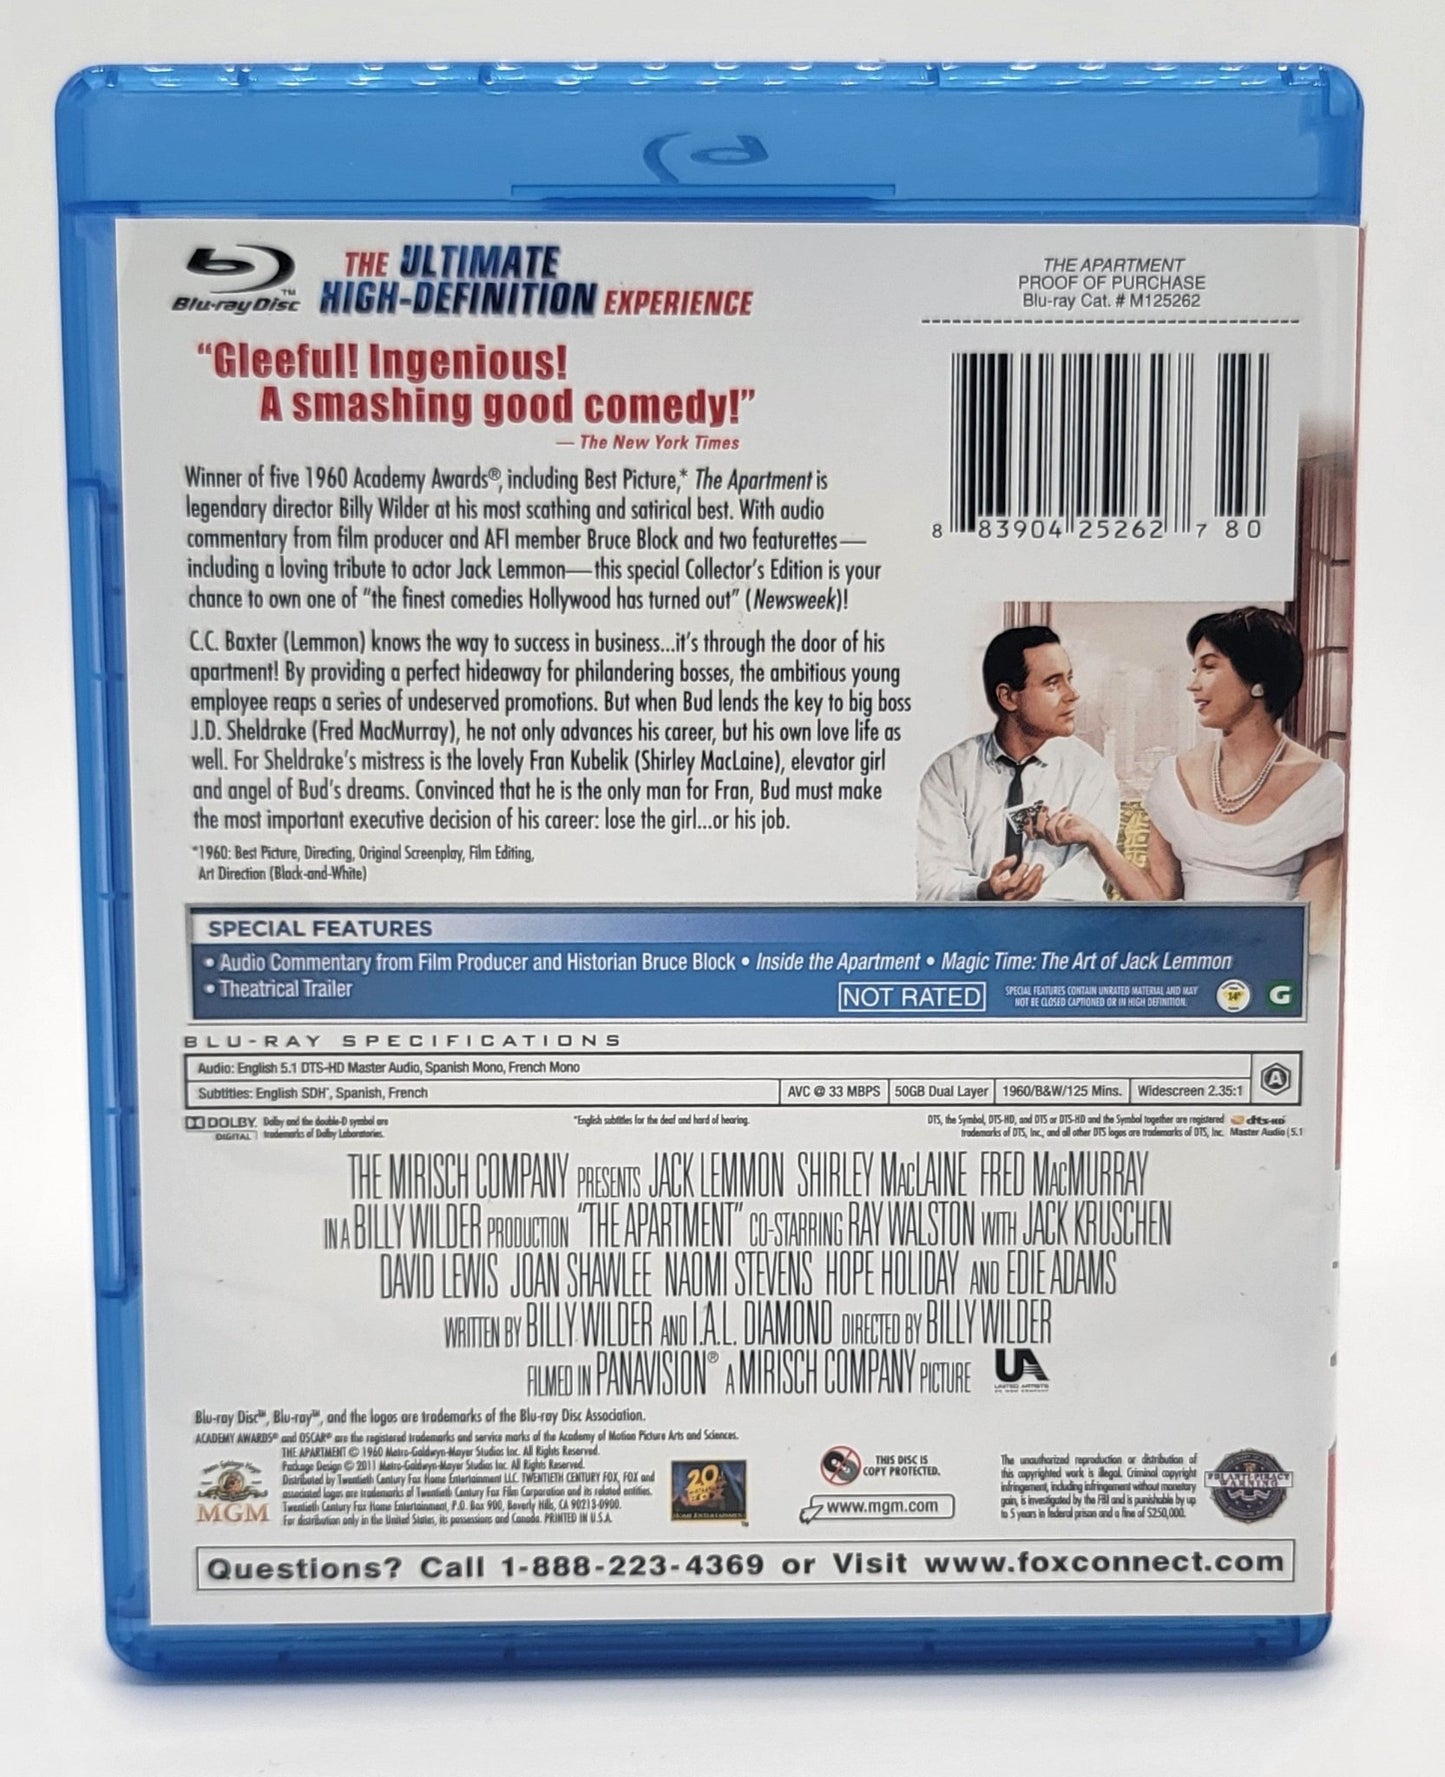 MGM - The Apartment |Blu-ray | Collector's Edition | Widescreen - Blu-ray - Steady Bunny Shop